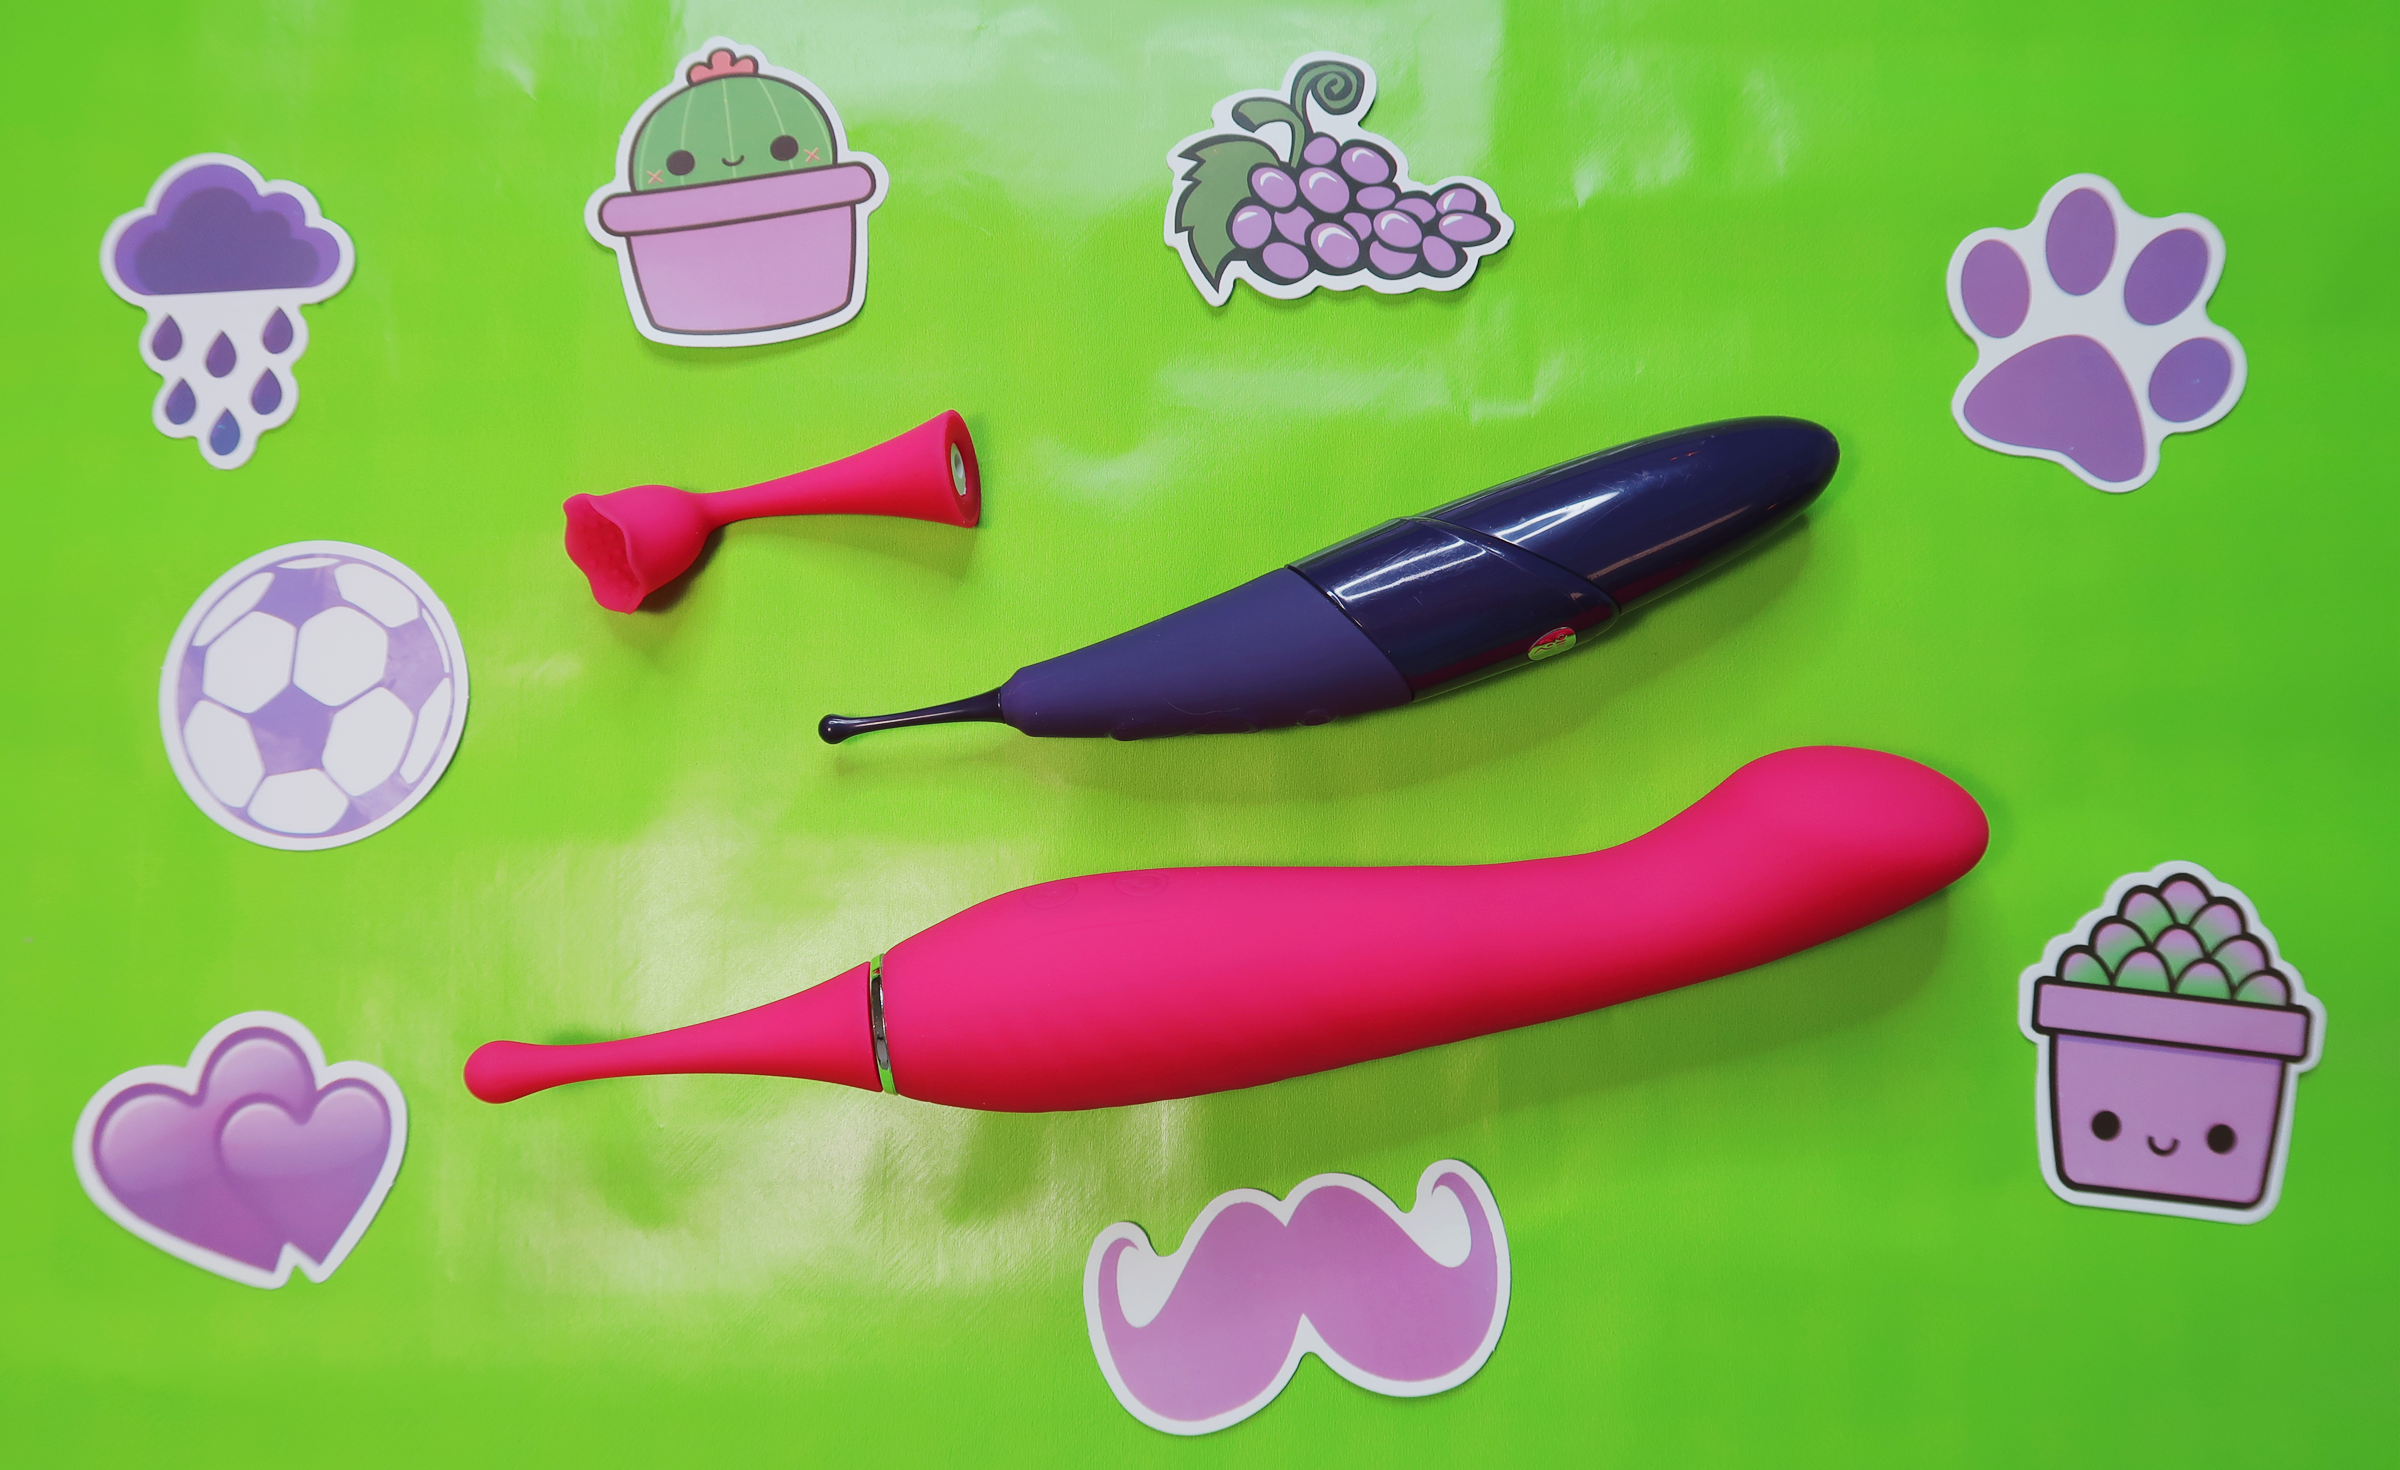 A Zumio laying on a green backdrop beside a larger, similarly pinpoint pink vibrator.